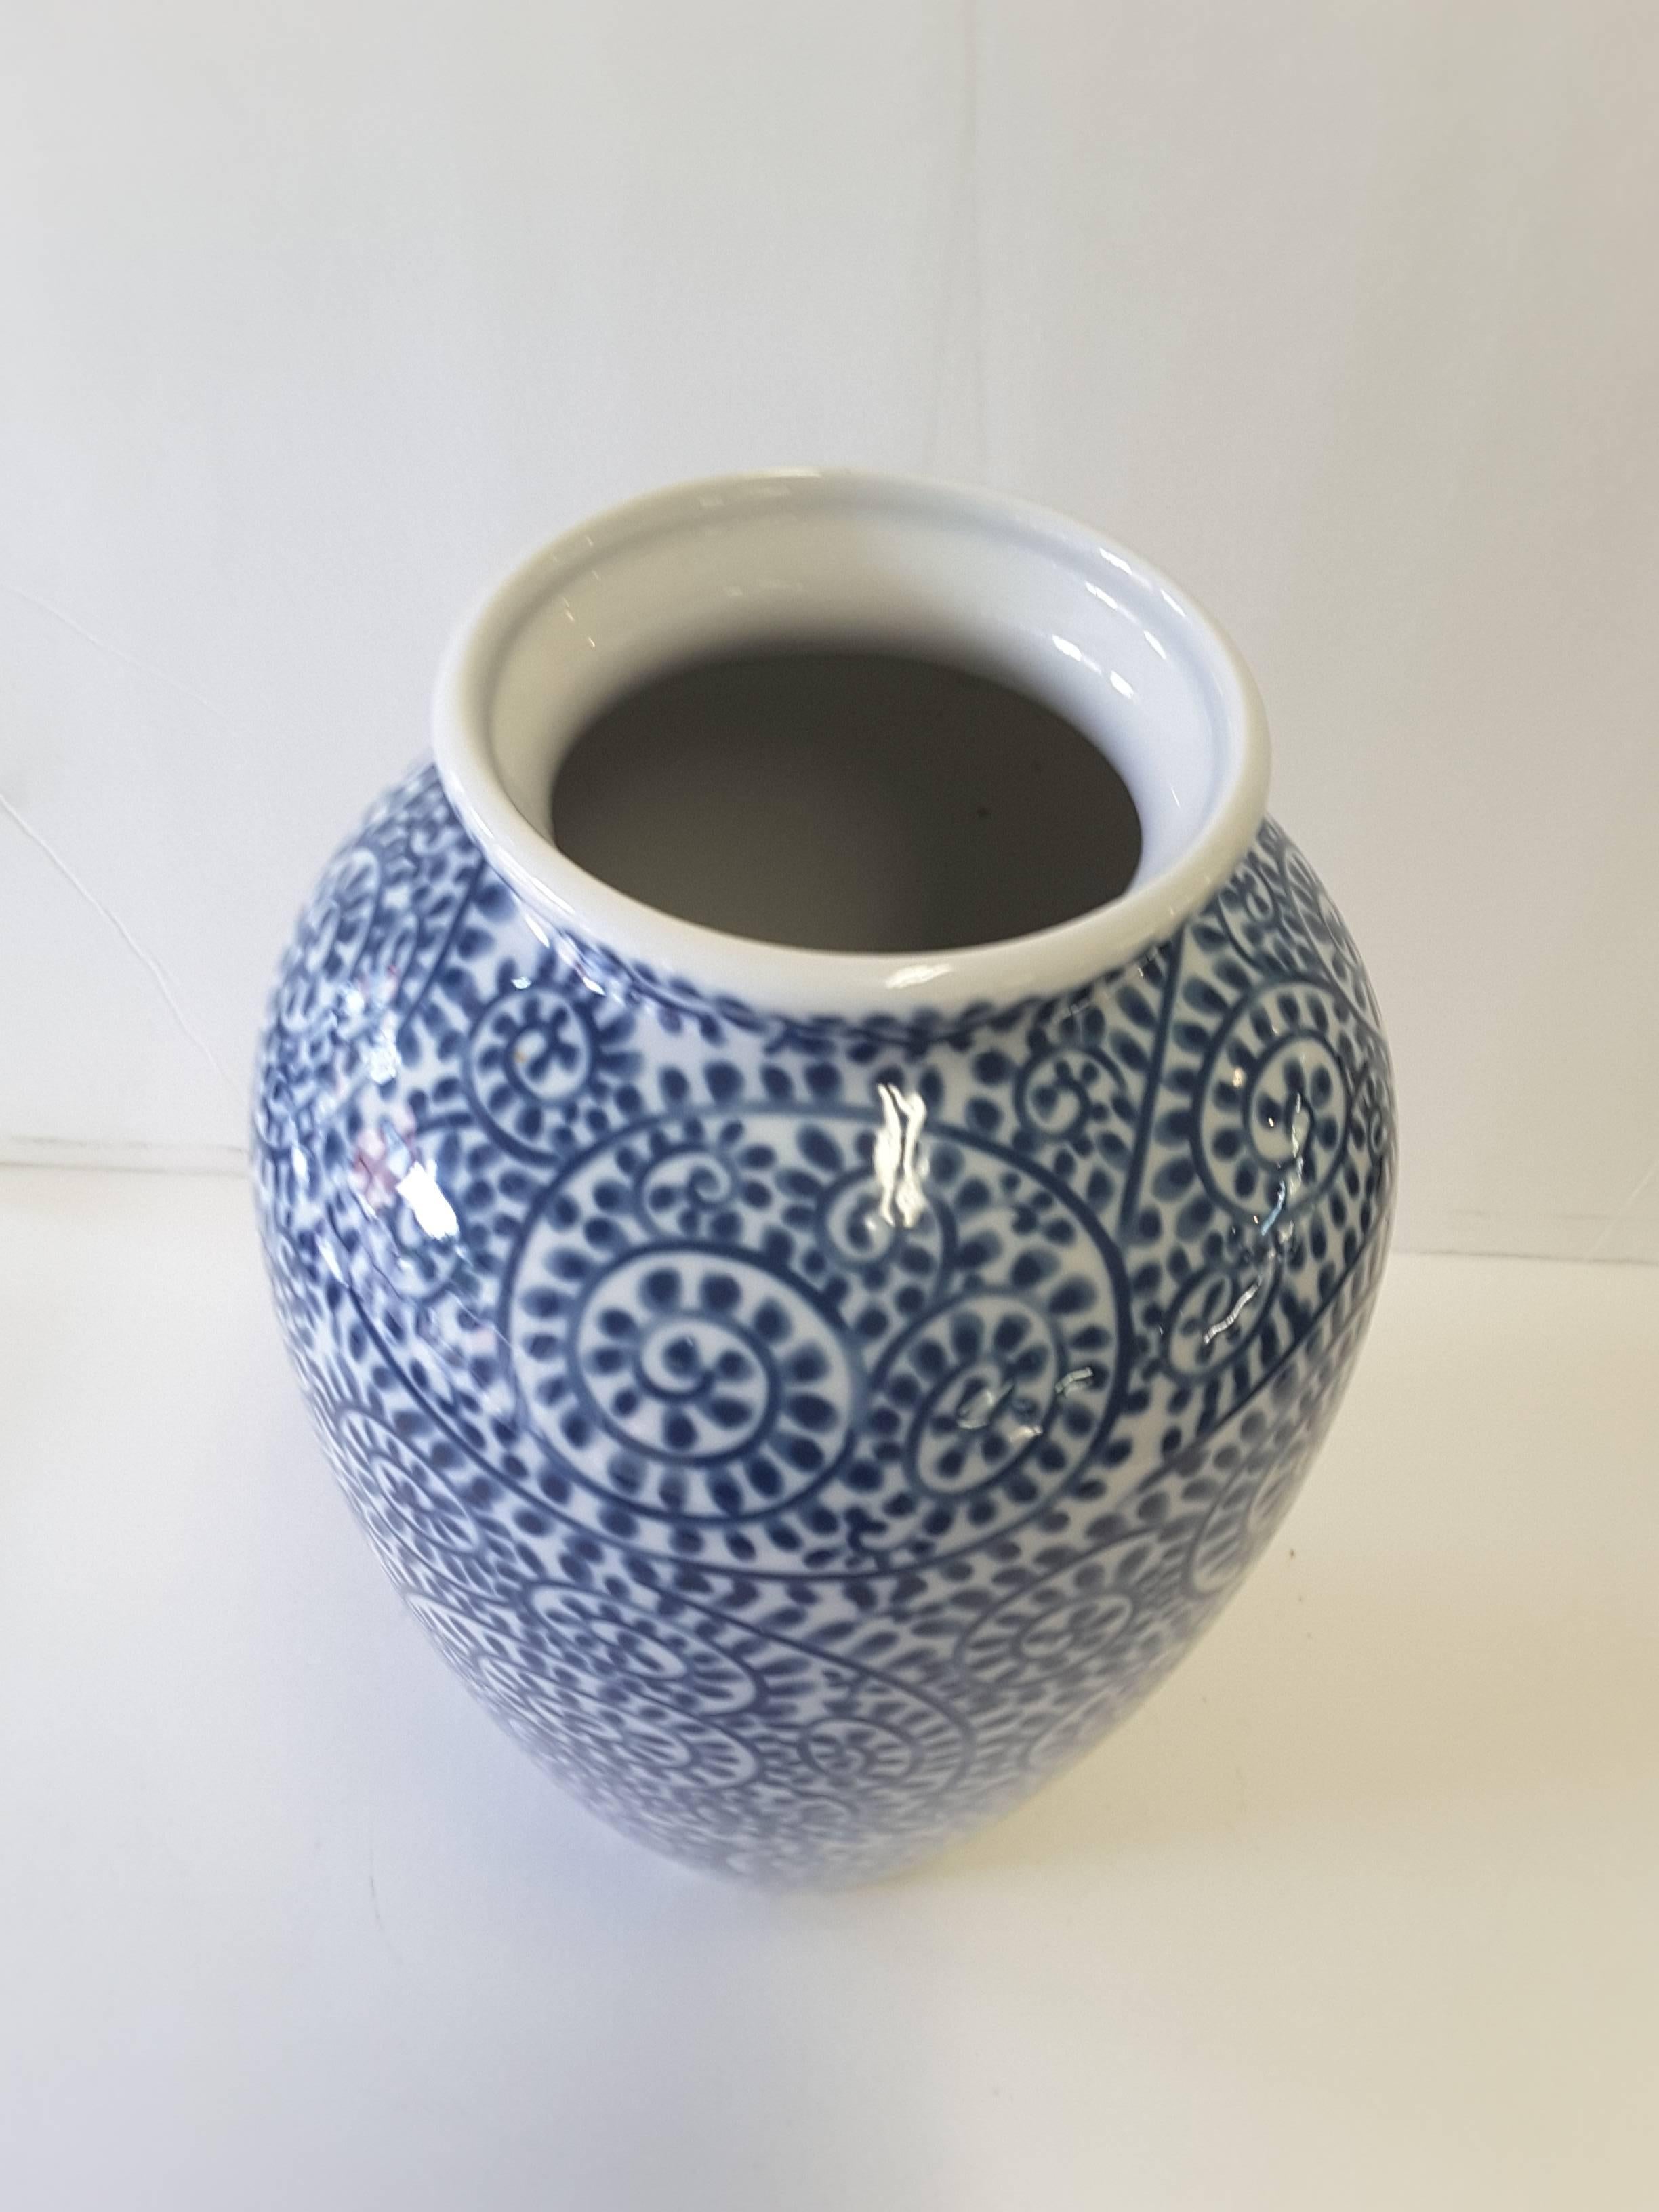 A Japanese blue and white porcelain hand decorated vase, "Tako Karakusa" pattern in underglaze, from Ryuho Kiln, (modern, late 20th century). The vase measures 10" inches high x 4 1/2" inches in diameter.